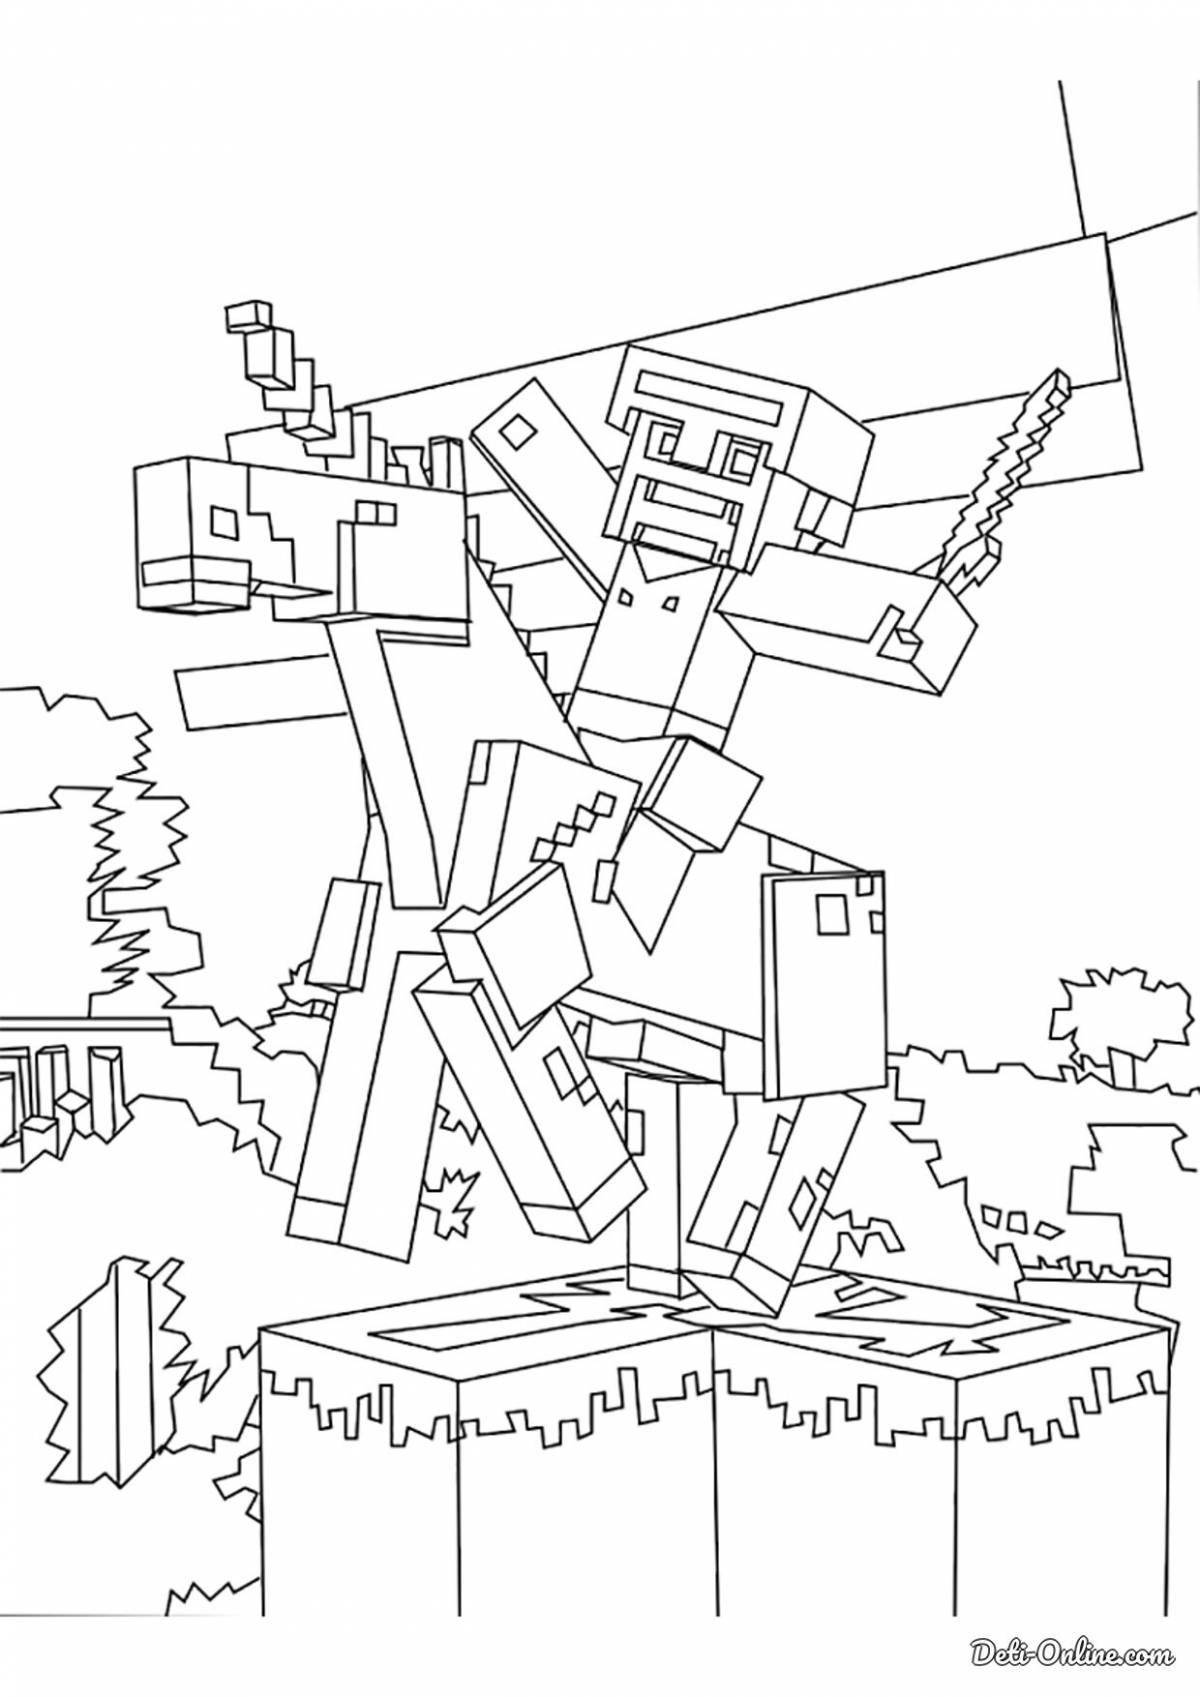 Minecraft panda weird coloring page